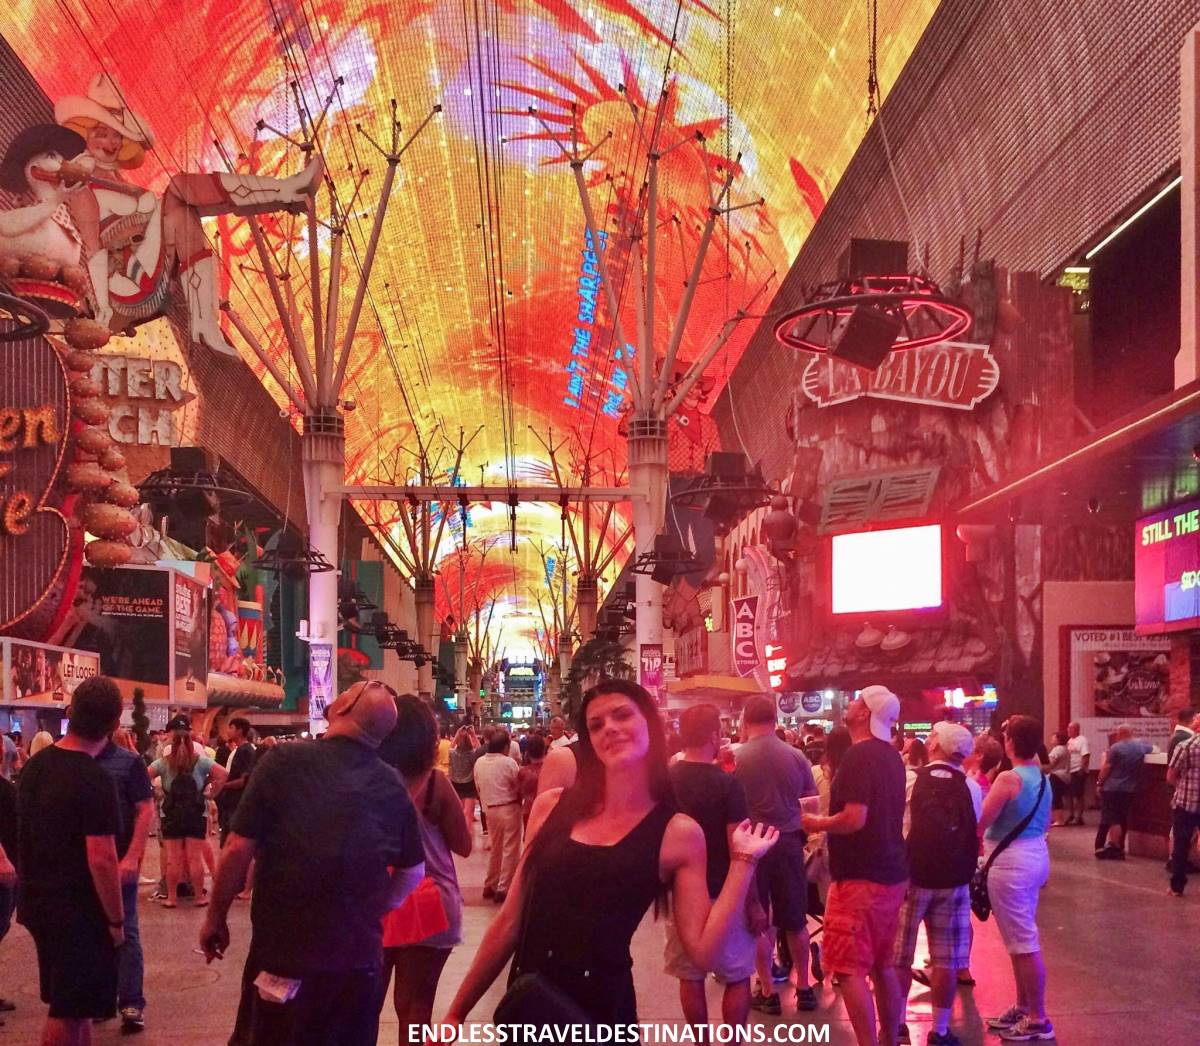 30+ Things to Do in Las Vegas - Fremont Street Experience - Endless Travel Destinations